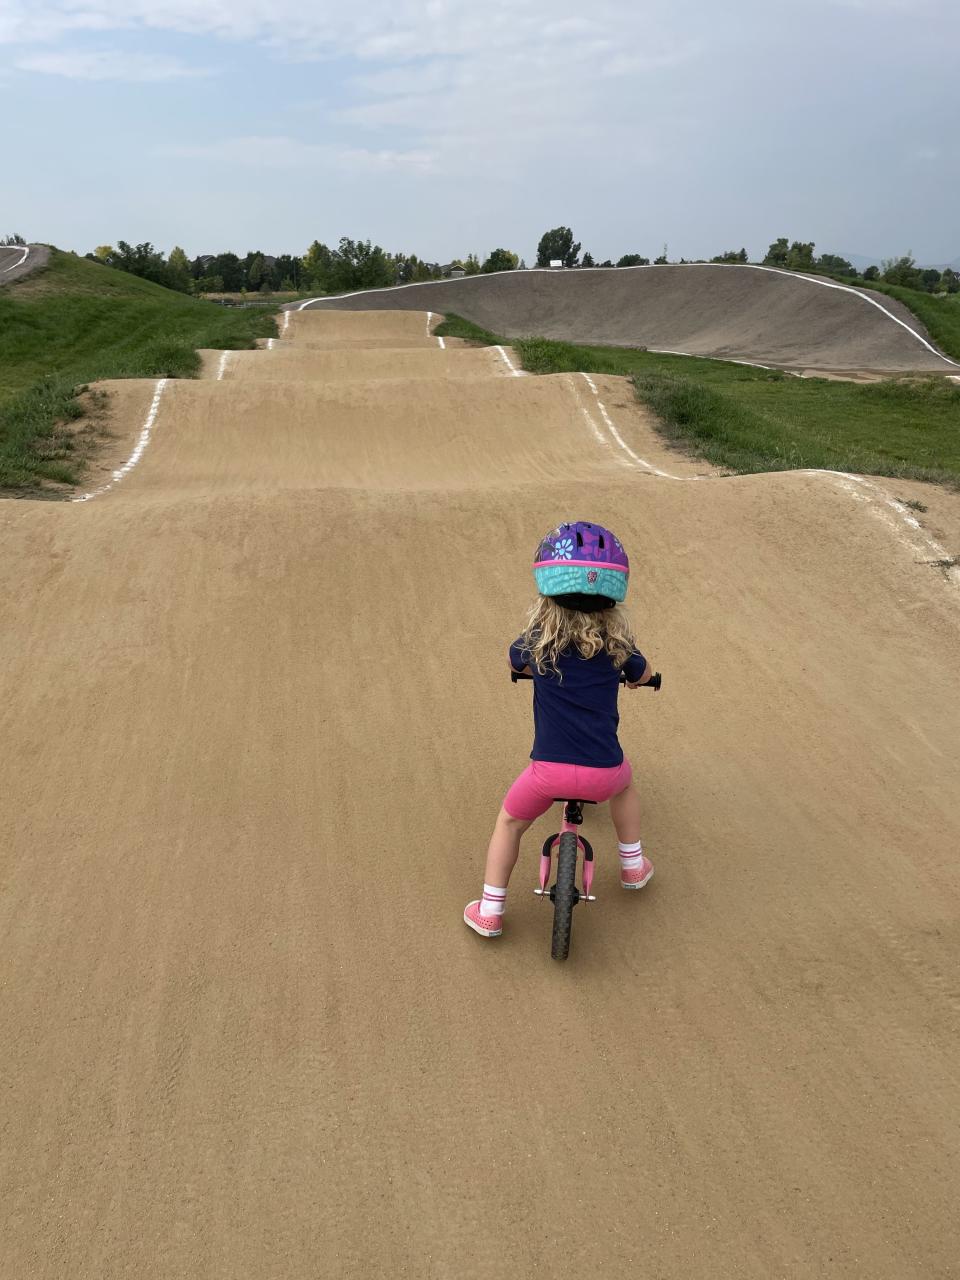 The author's daughter riding a bike